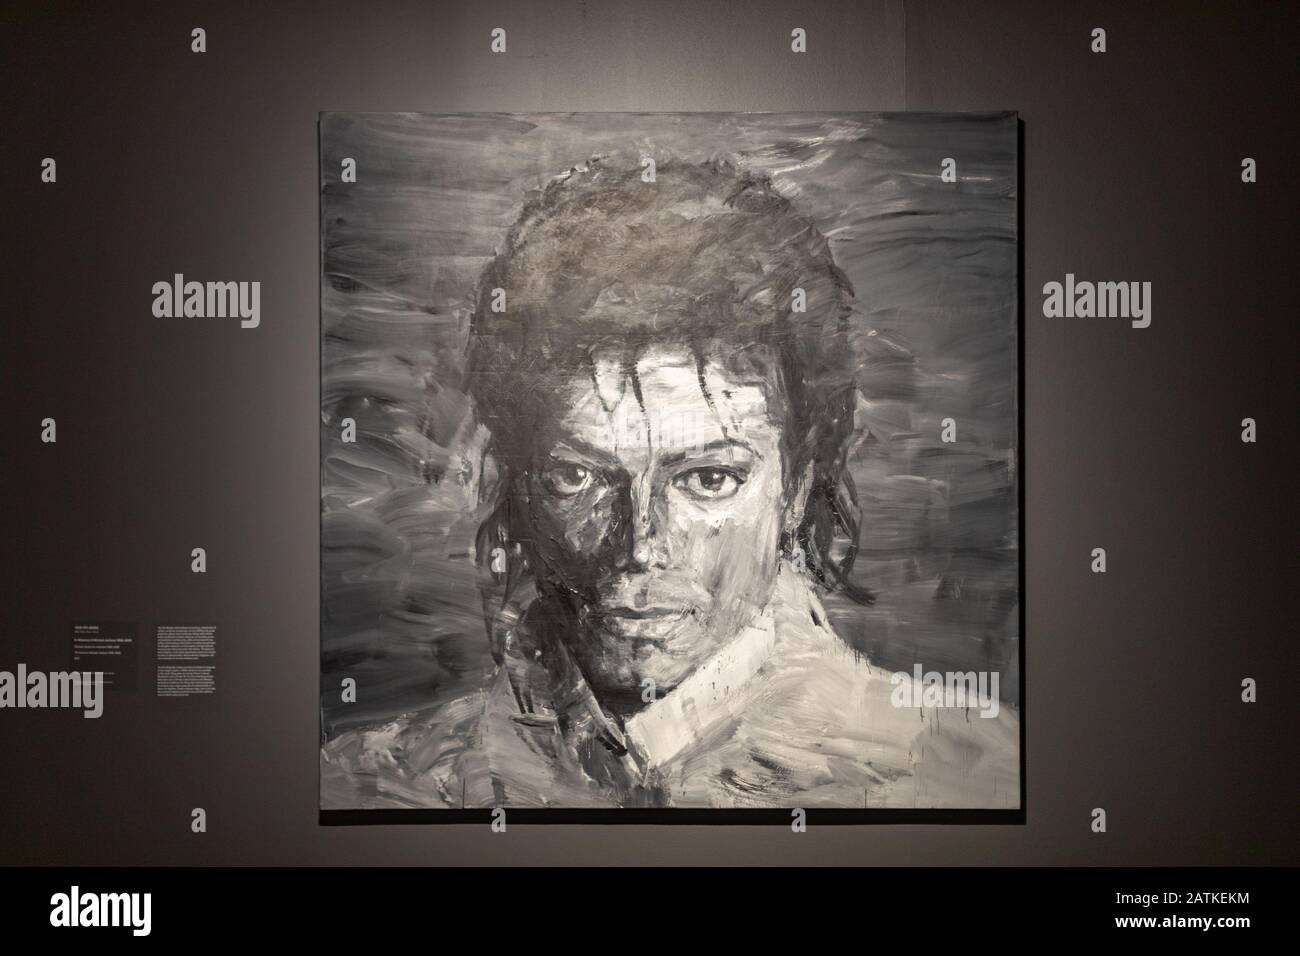 In Memory of Michael Jackson, oil on canvas by Yan Pei-Ming, at On the Wall exhibition in EMMA (Espoo Museum of Modern Art). Espoo, Finland. Stock Photo